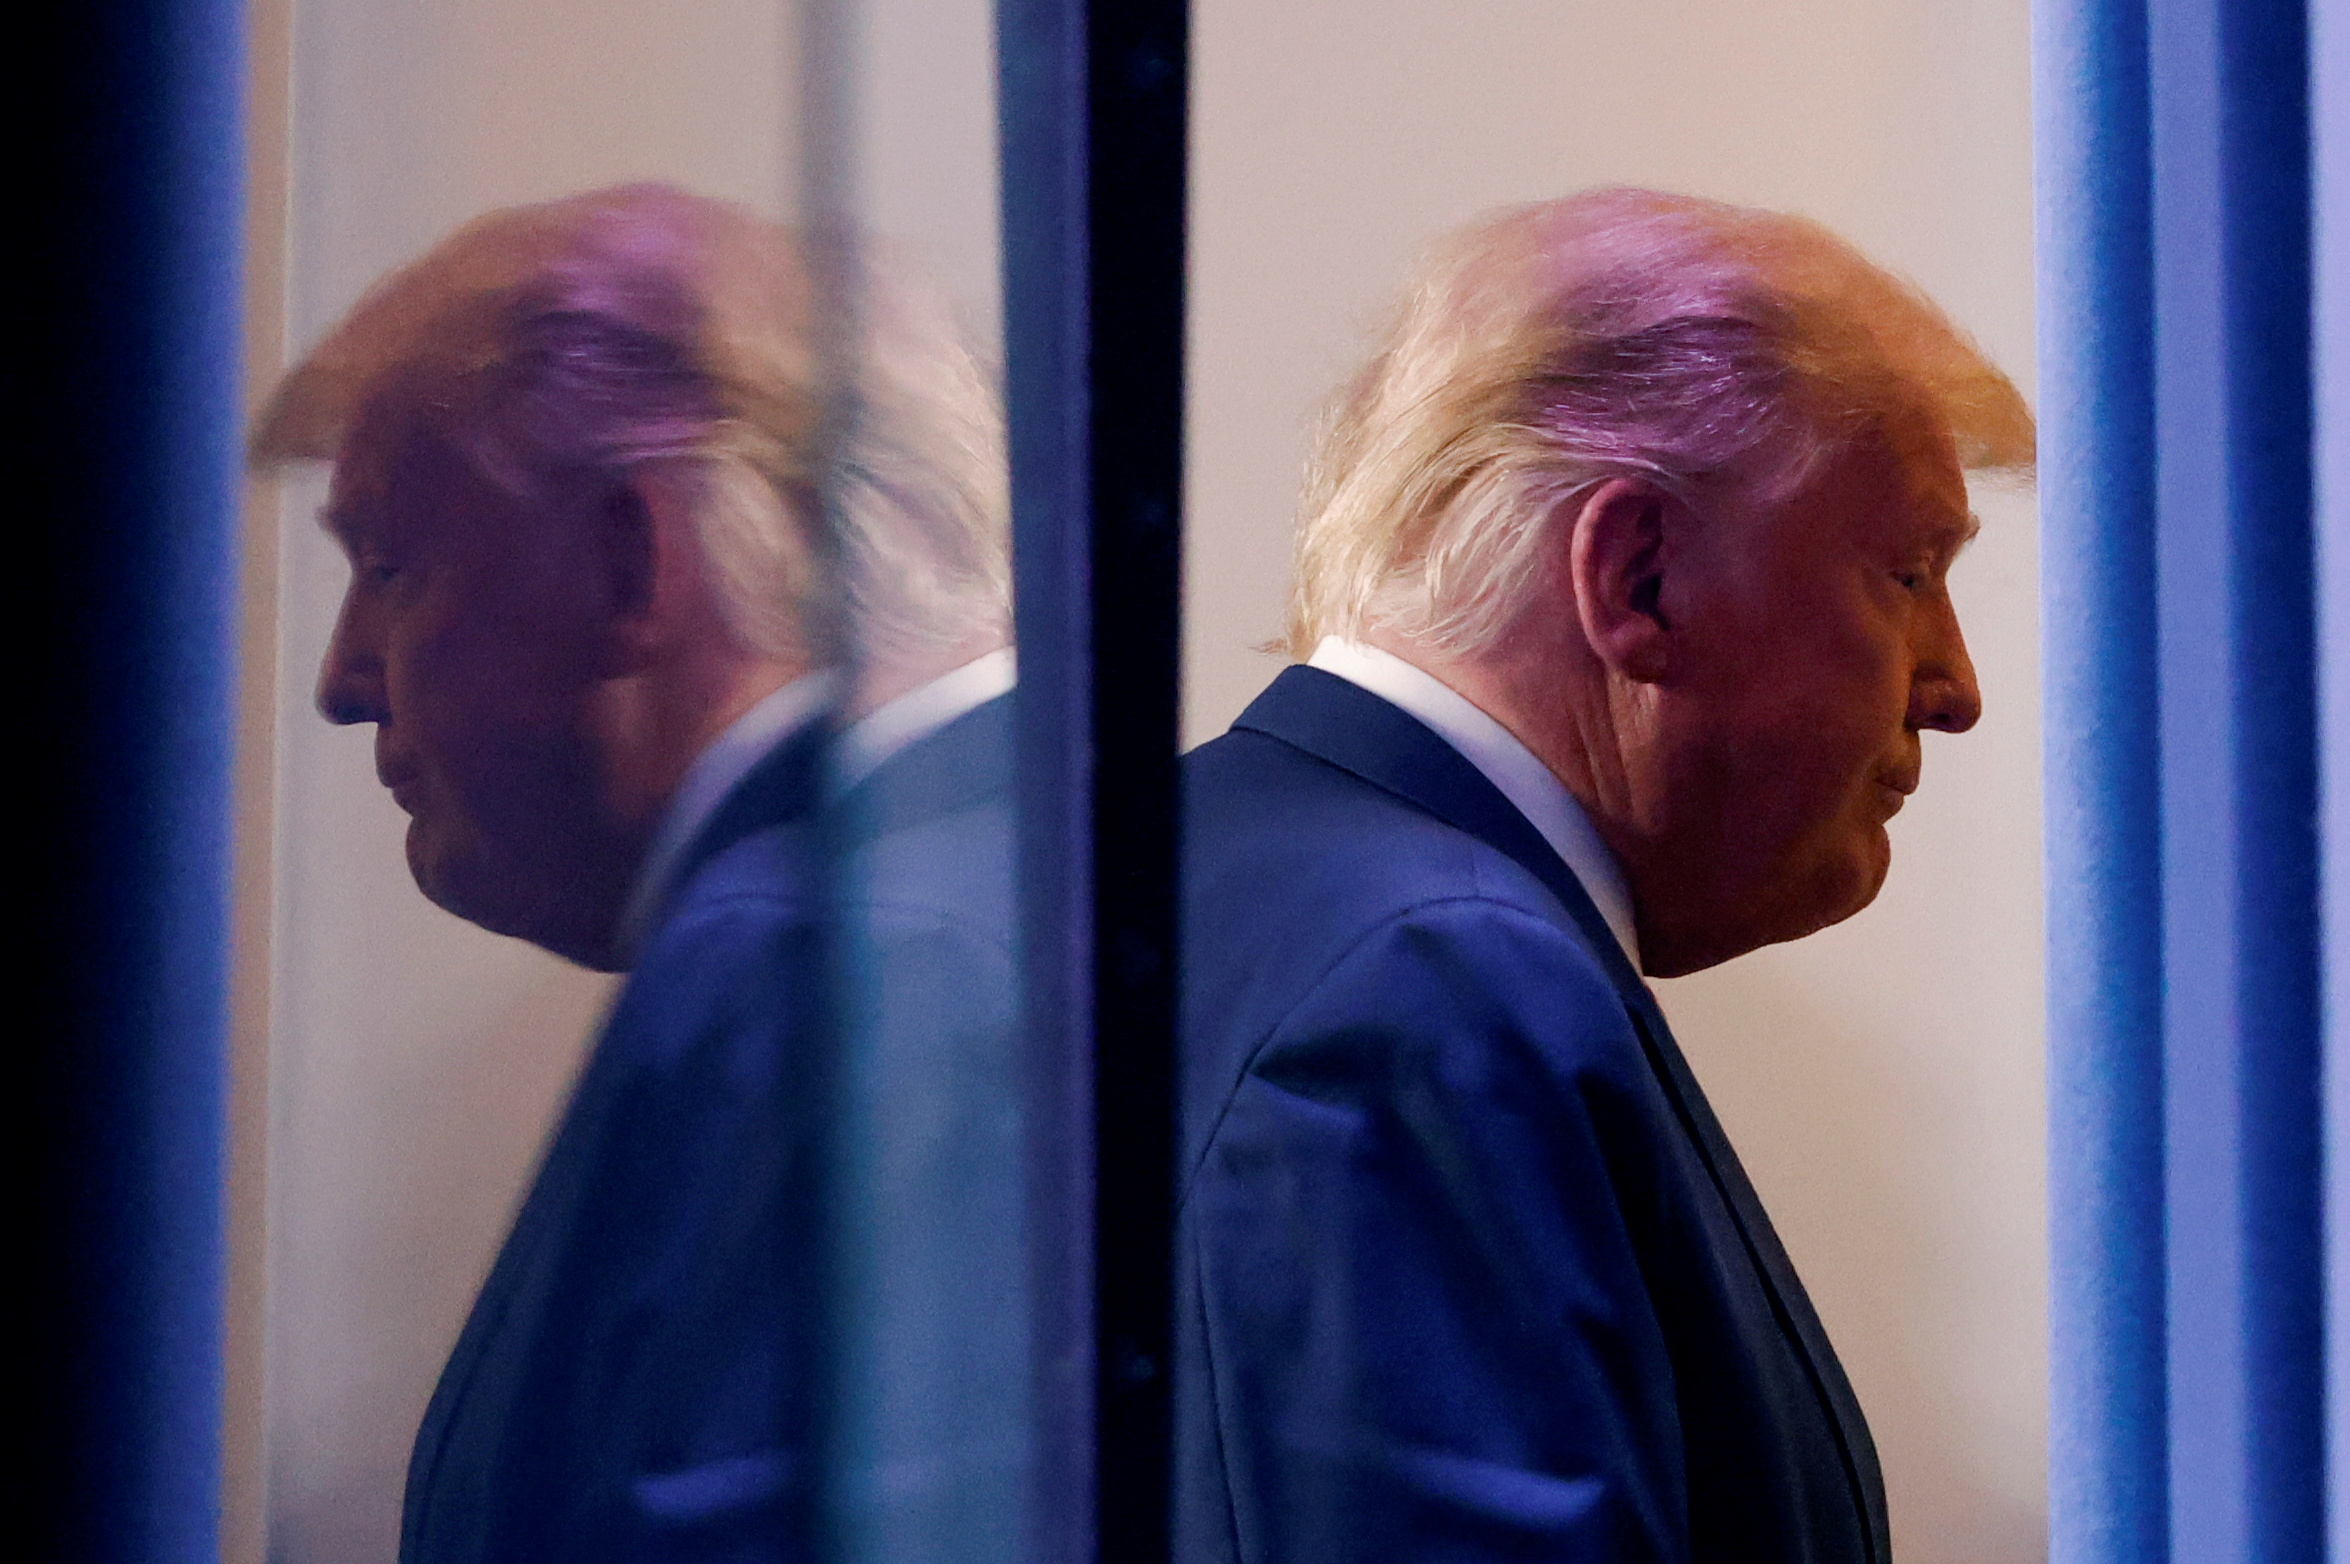 PHOTO: President Donald Trump is reflected as he departs after speaking in the Brady Press Briefing Room at the White House in Washington, Nov. 5, 2020.